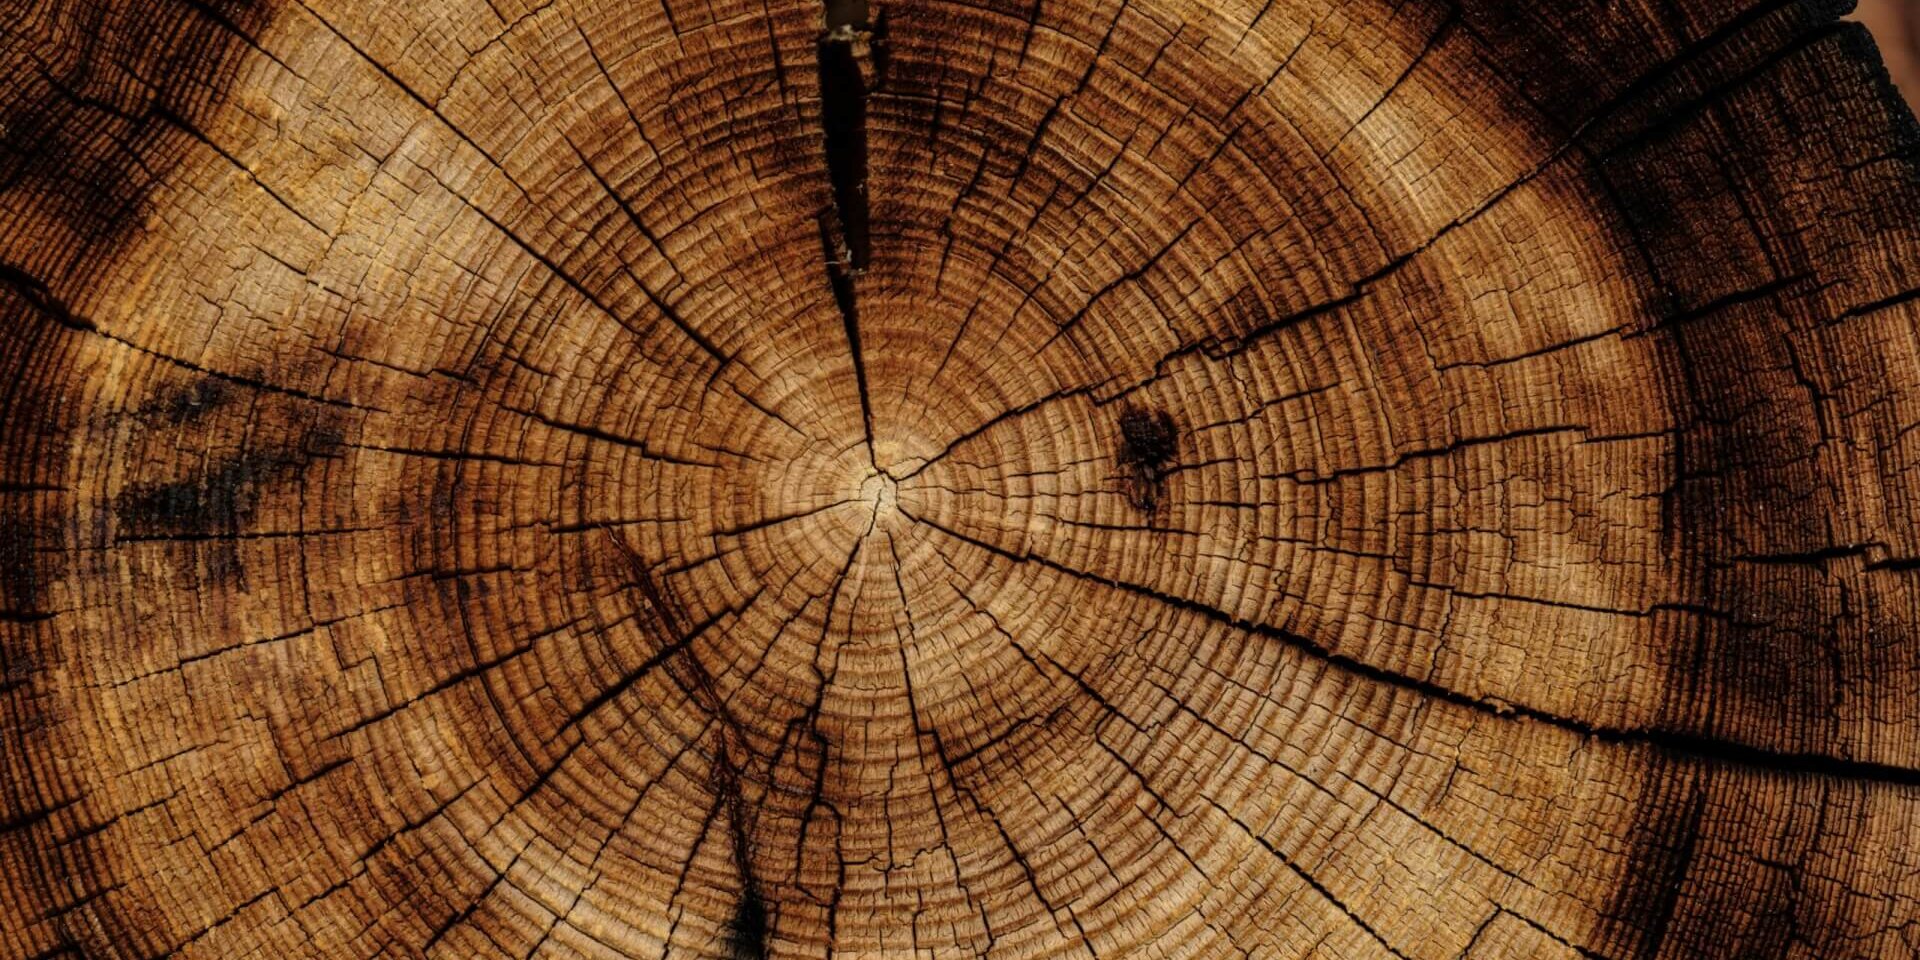 Close-up view of a tree's cross section